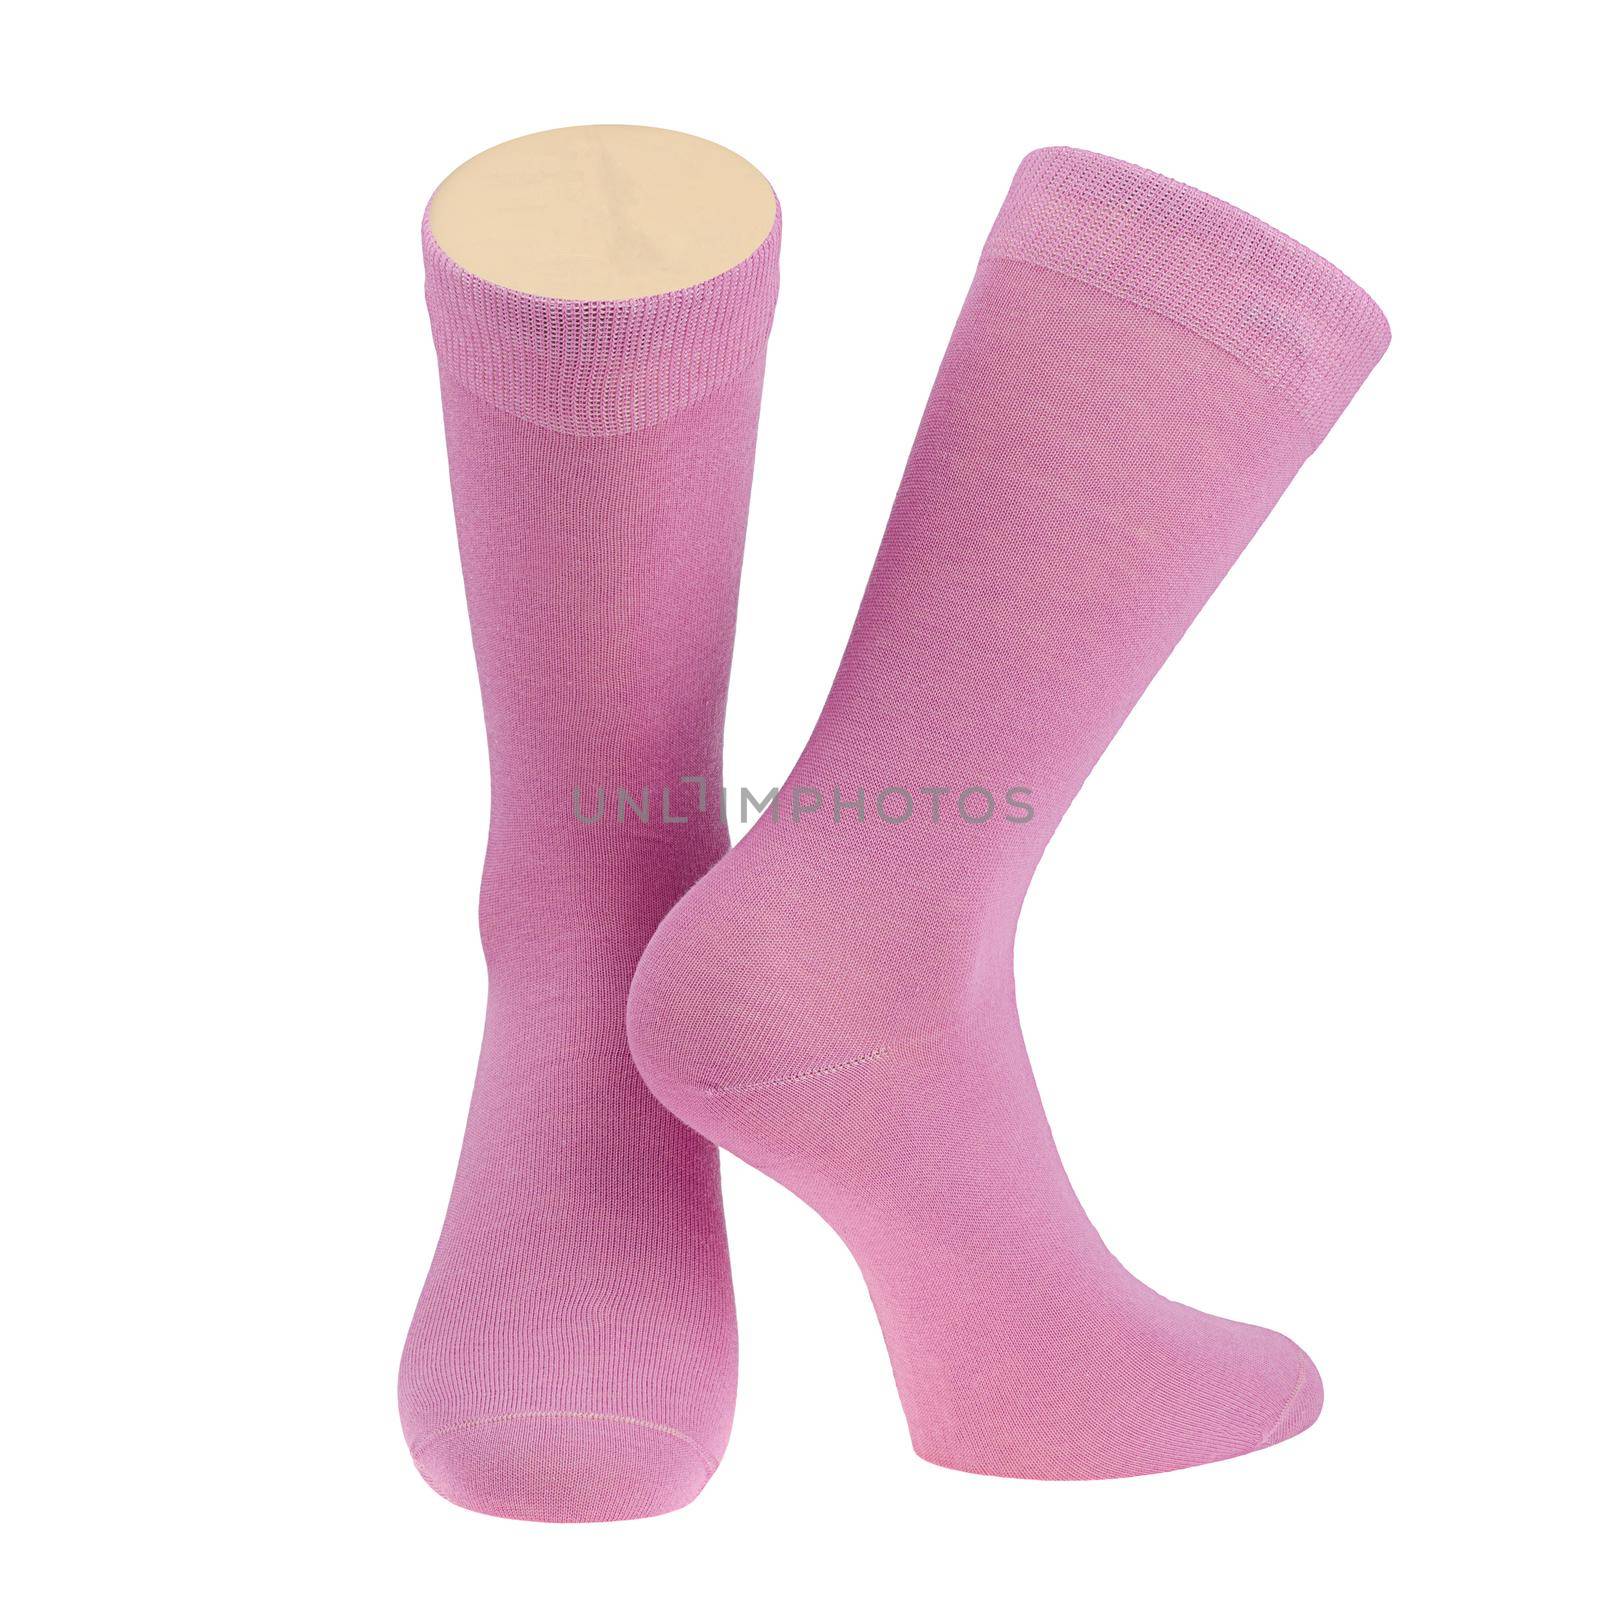 Pink Socks on mannequin legs isolated on white